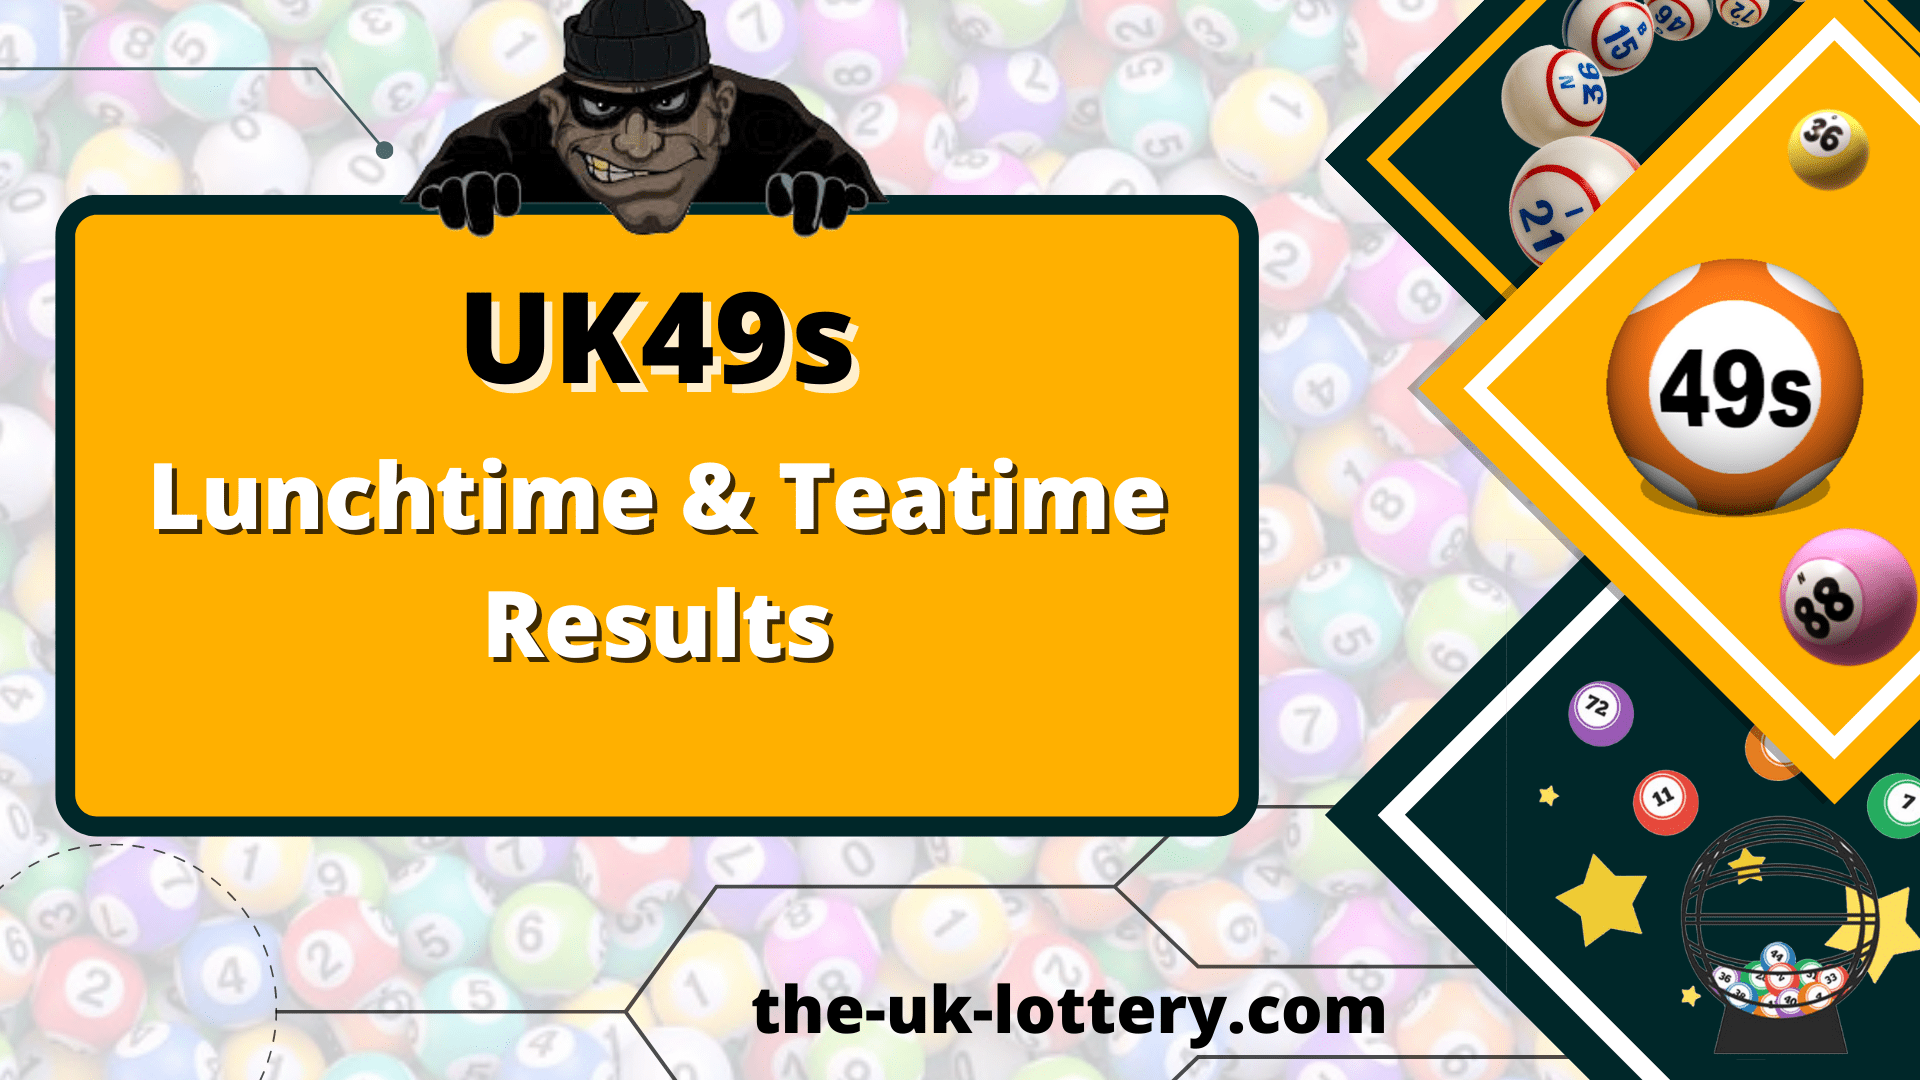 UK49s Lunchtime Results 2022 & Teatime Result (Predictions, uk 49s win)